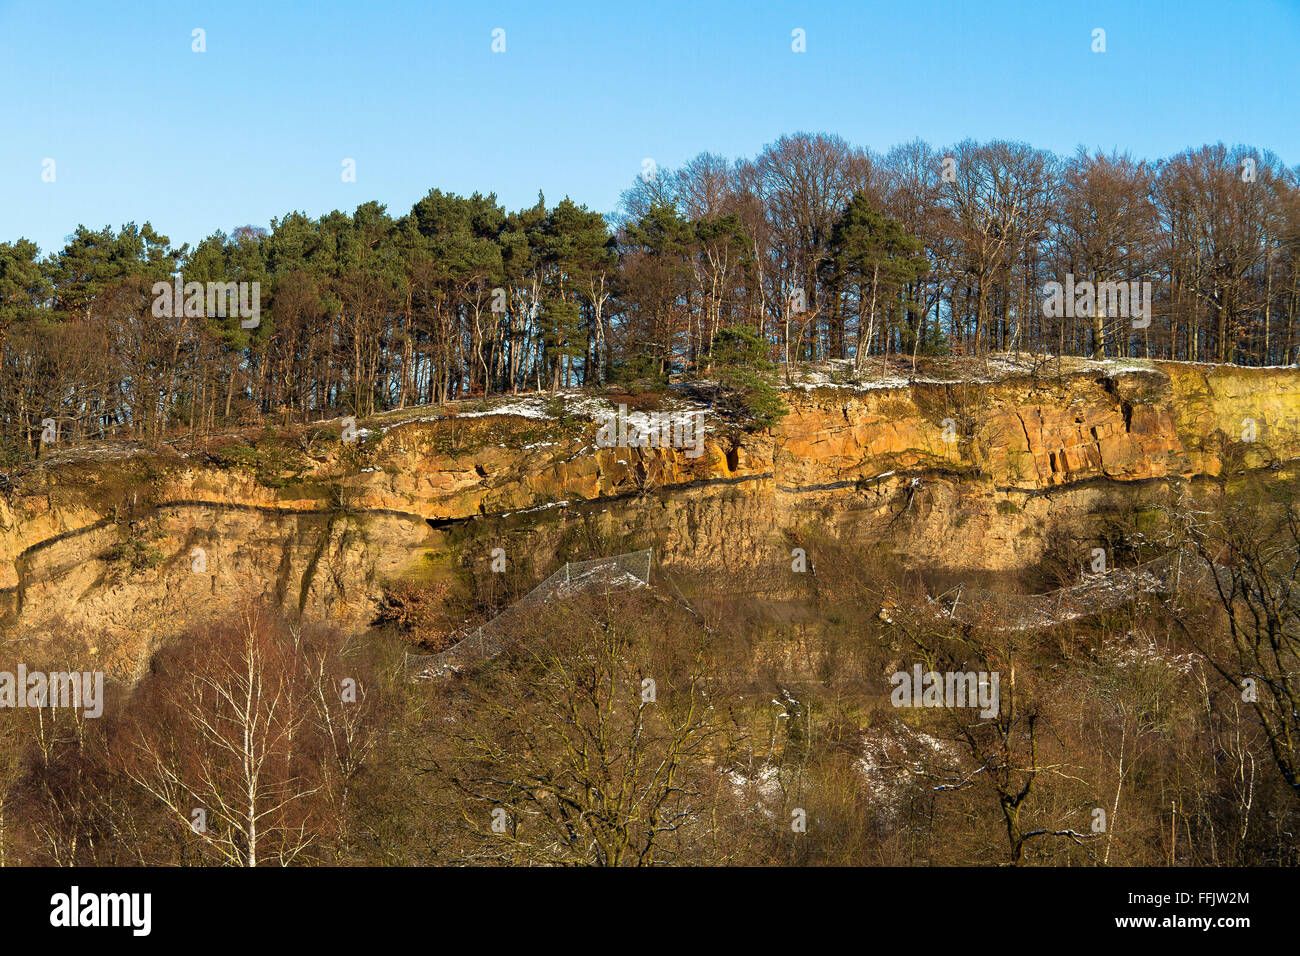 Europe, Germany, Ruhr Area, Witten, at the stone quarry Duenkelberg a coal seam is visible Stock Photo